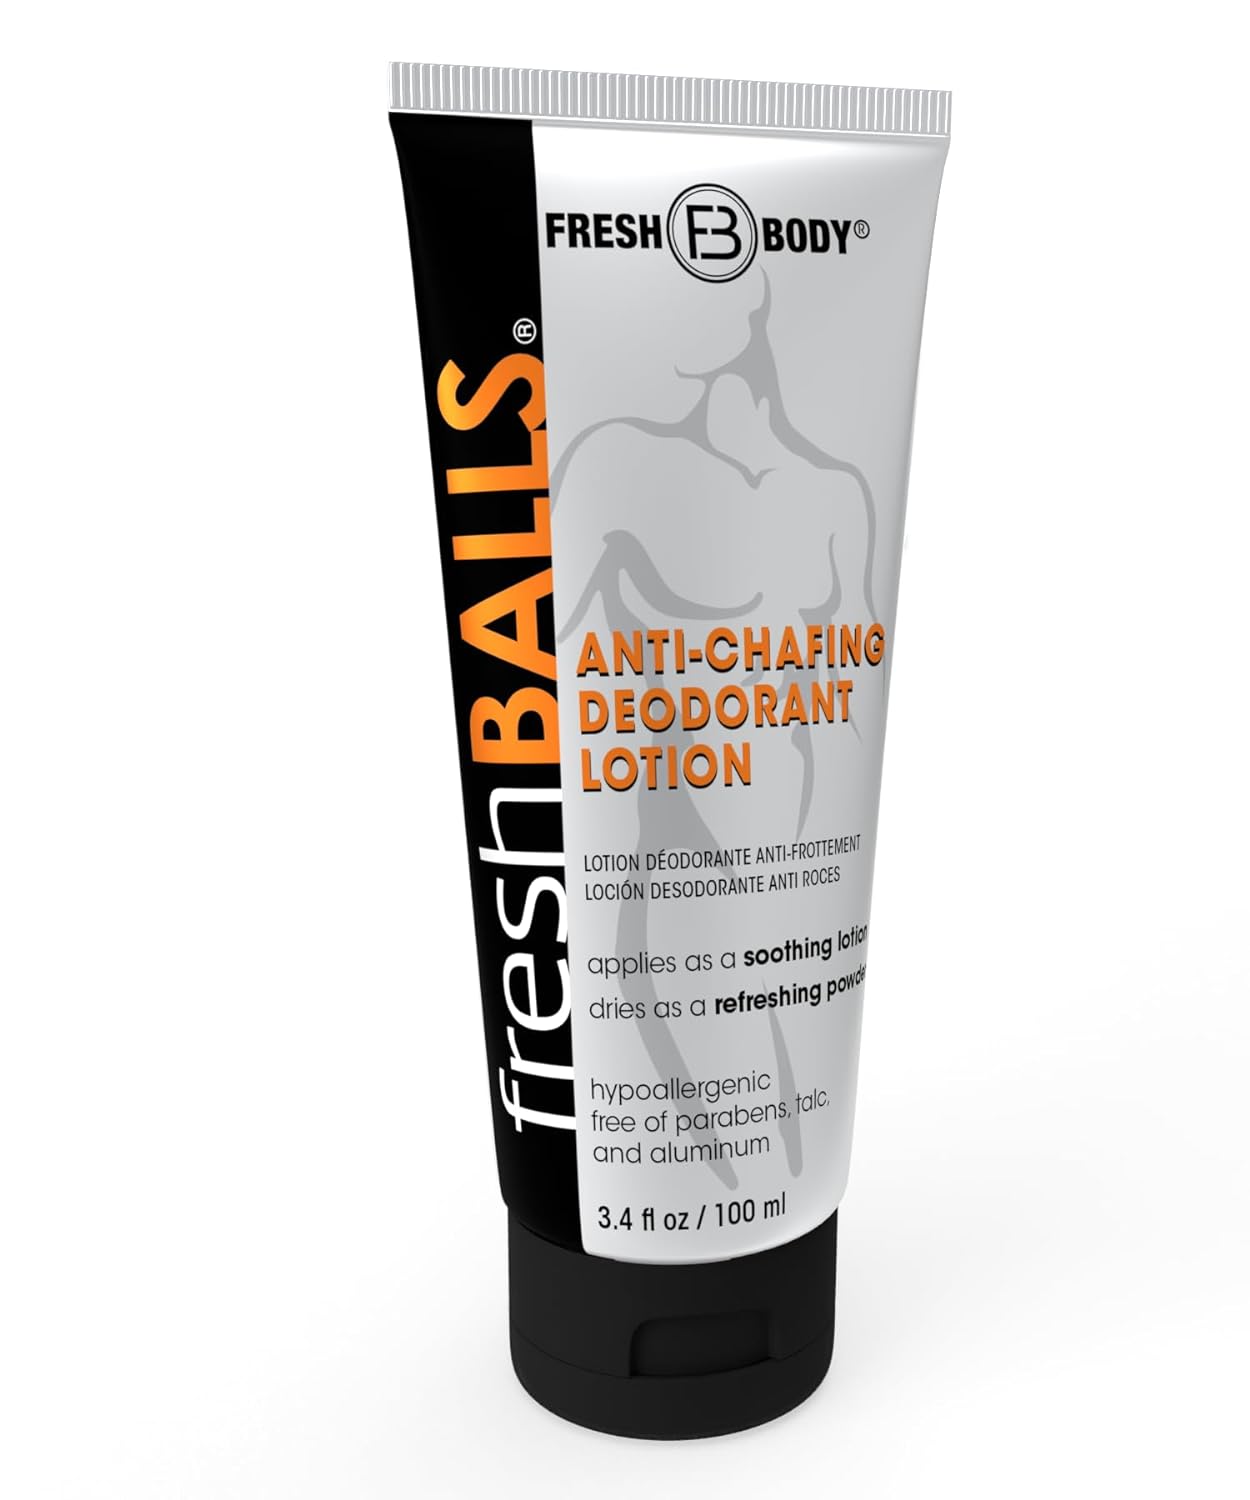 Fresh BALLS - Men's Anti-Chafing Soothing Cream to Powder - Ball Deodorant and Hygiene for Groin Area - The Original Anti Chafe Lotion for Men, 3.4 fl oz